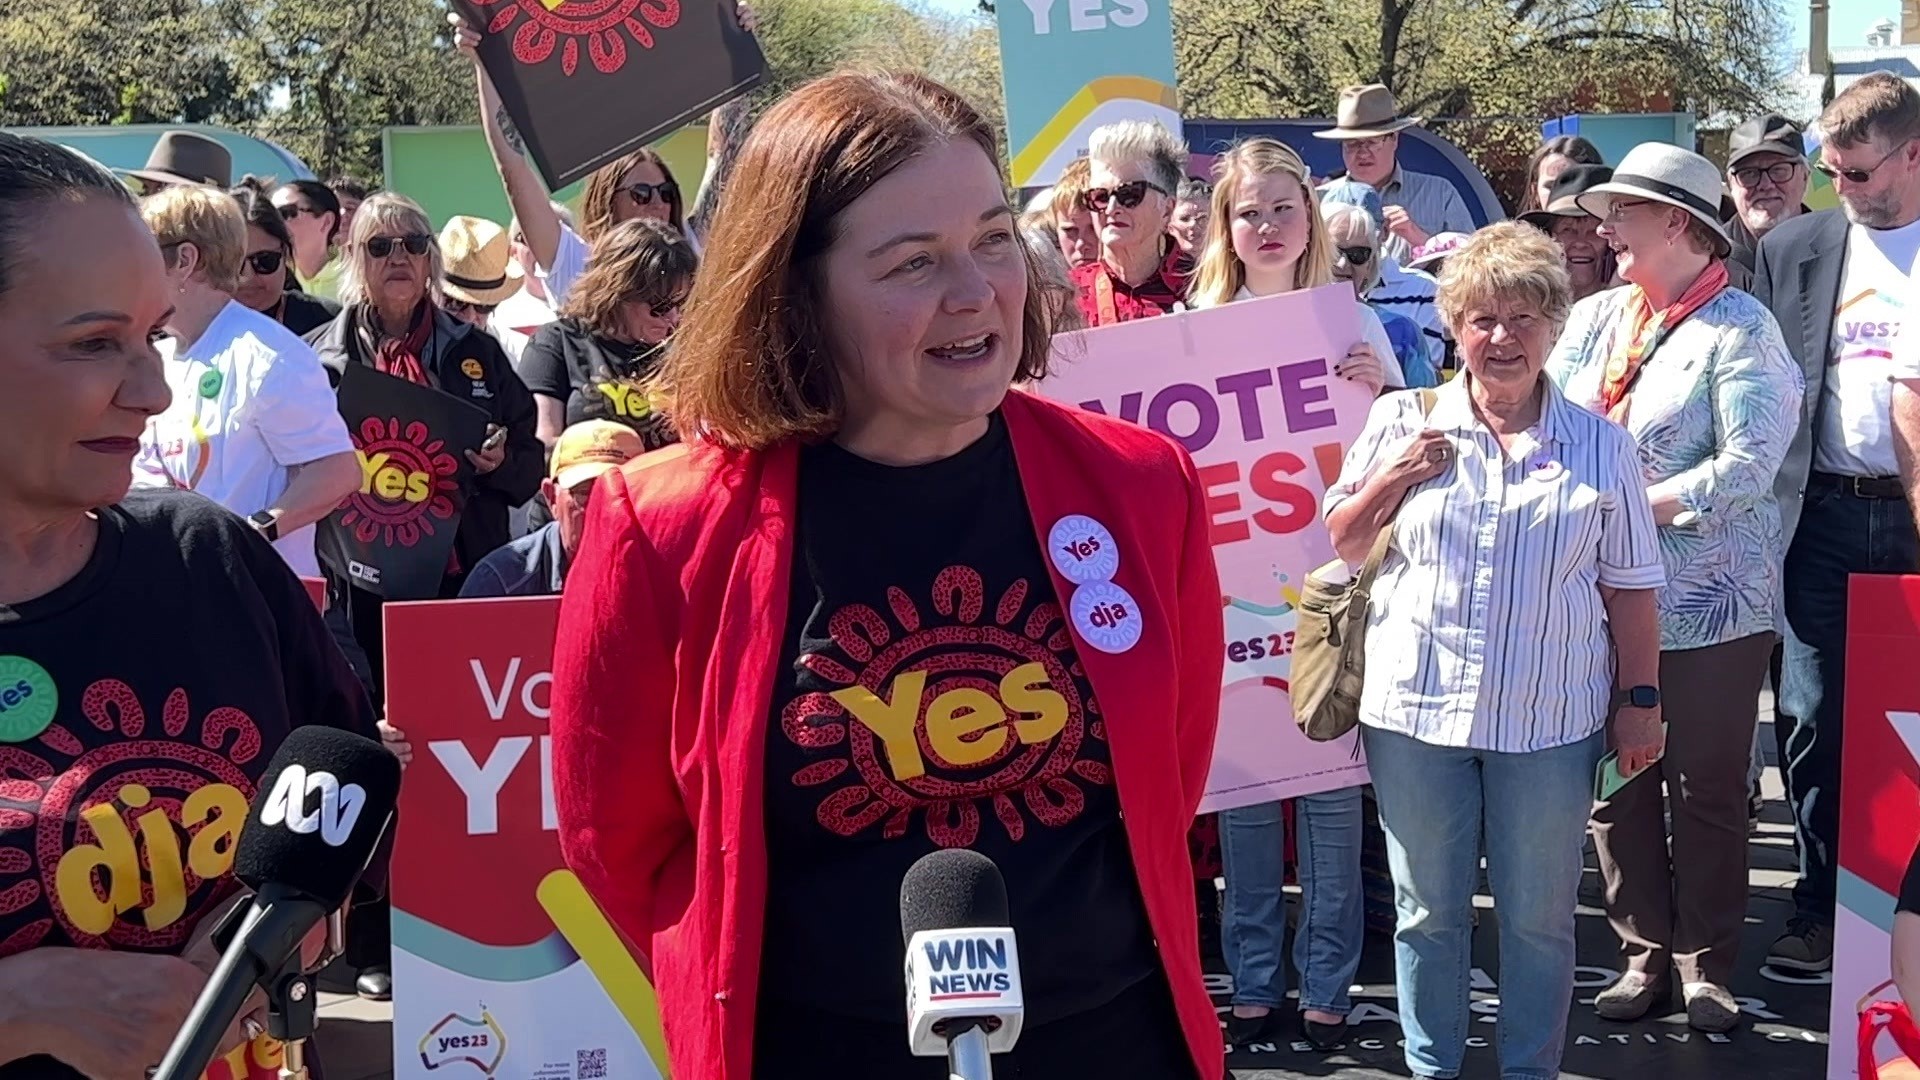 A Yes Vote rally